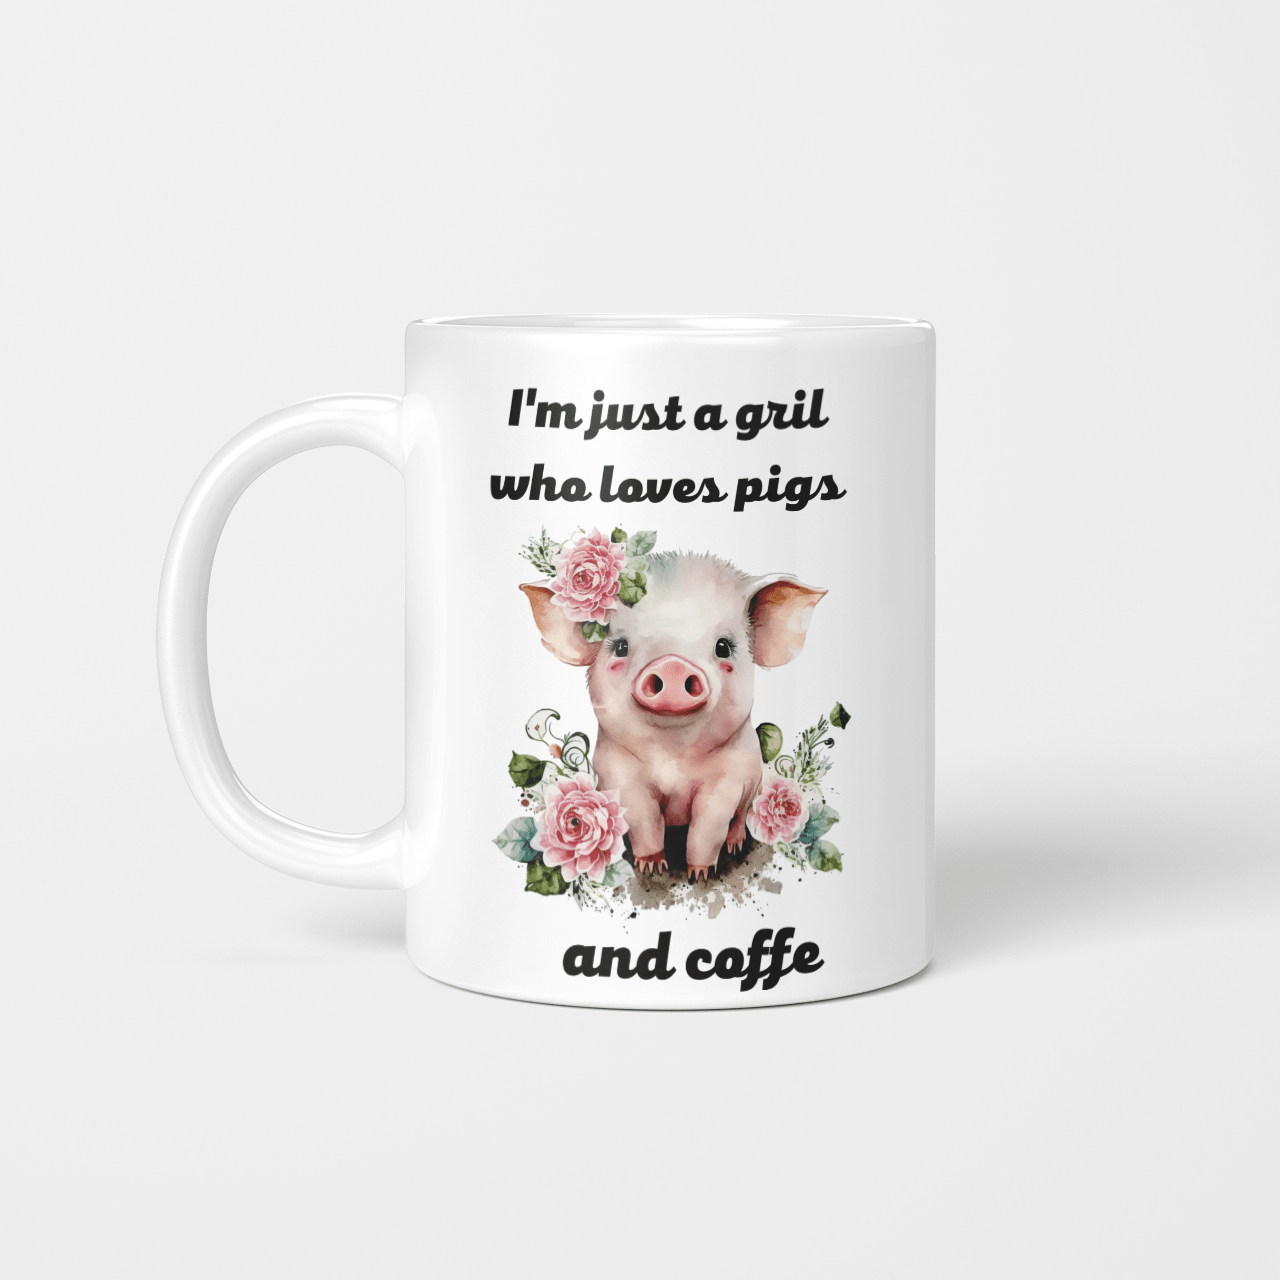 I'm just a gril who loves pigs mug